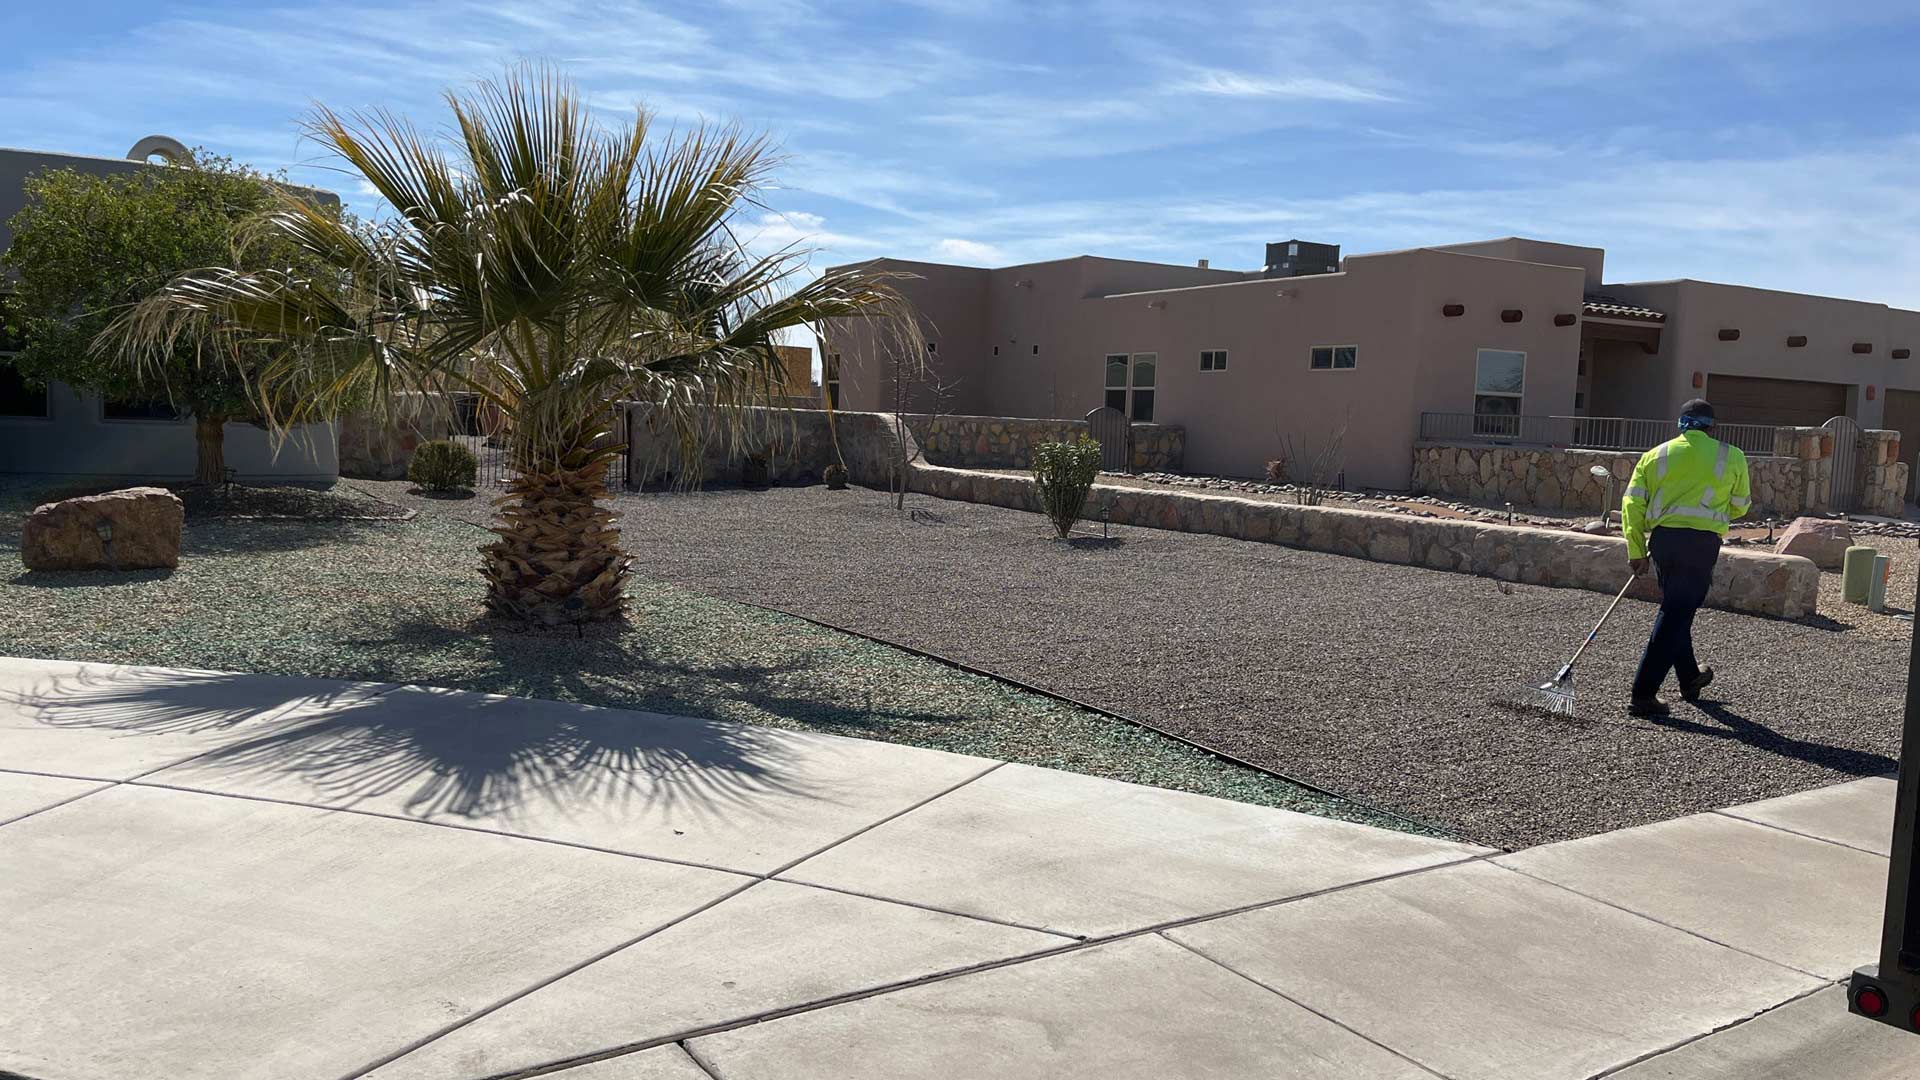 Extreme Landscaping's crew member in landscape raking rock installed in Mesilla, NM.